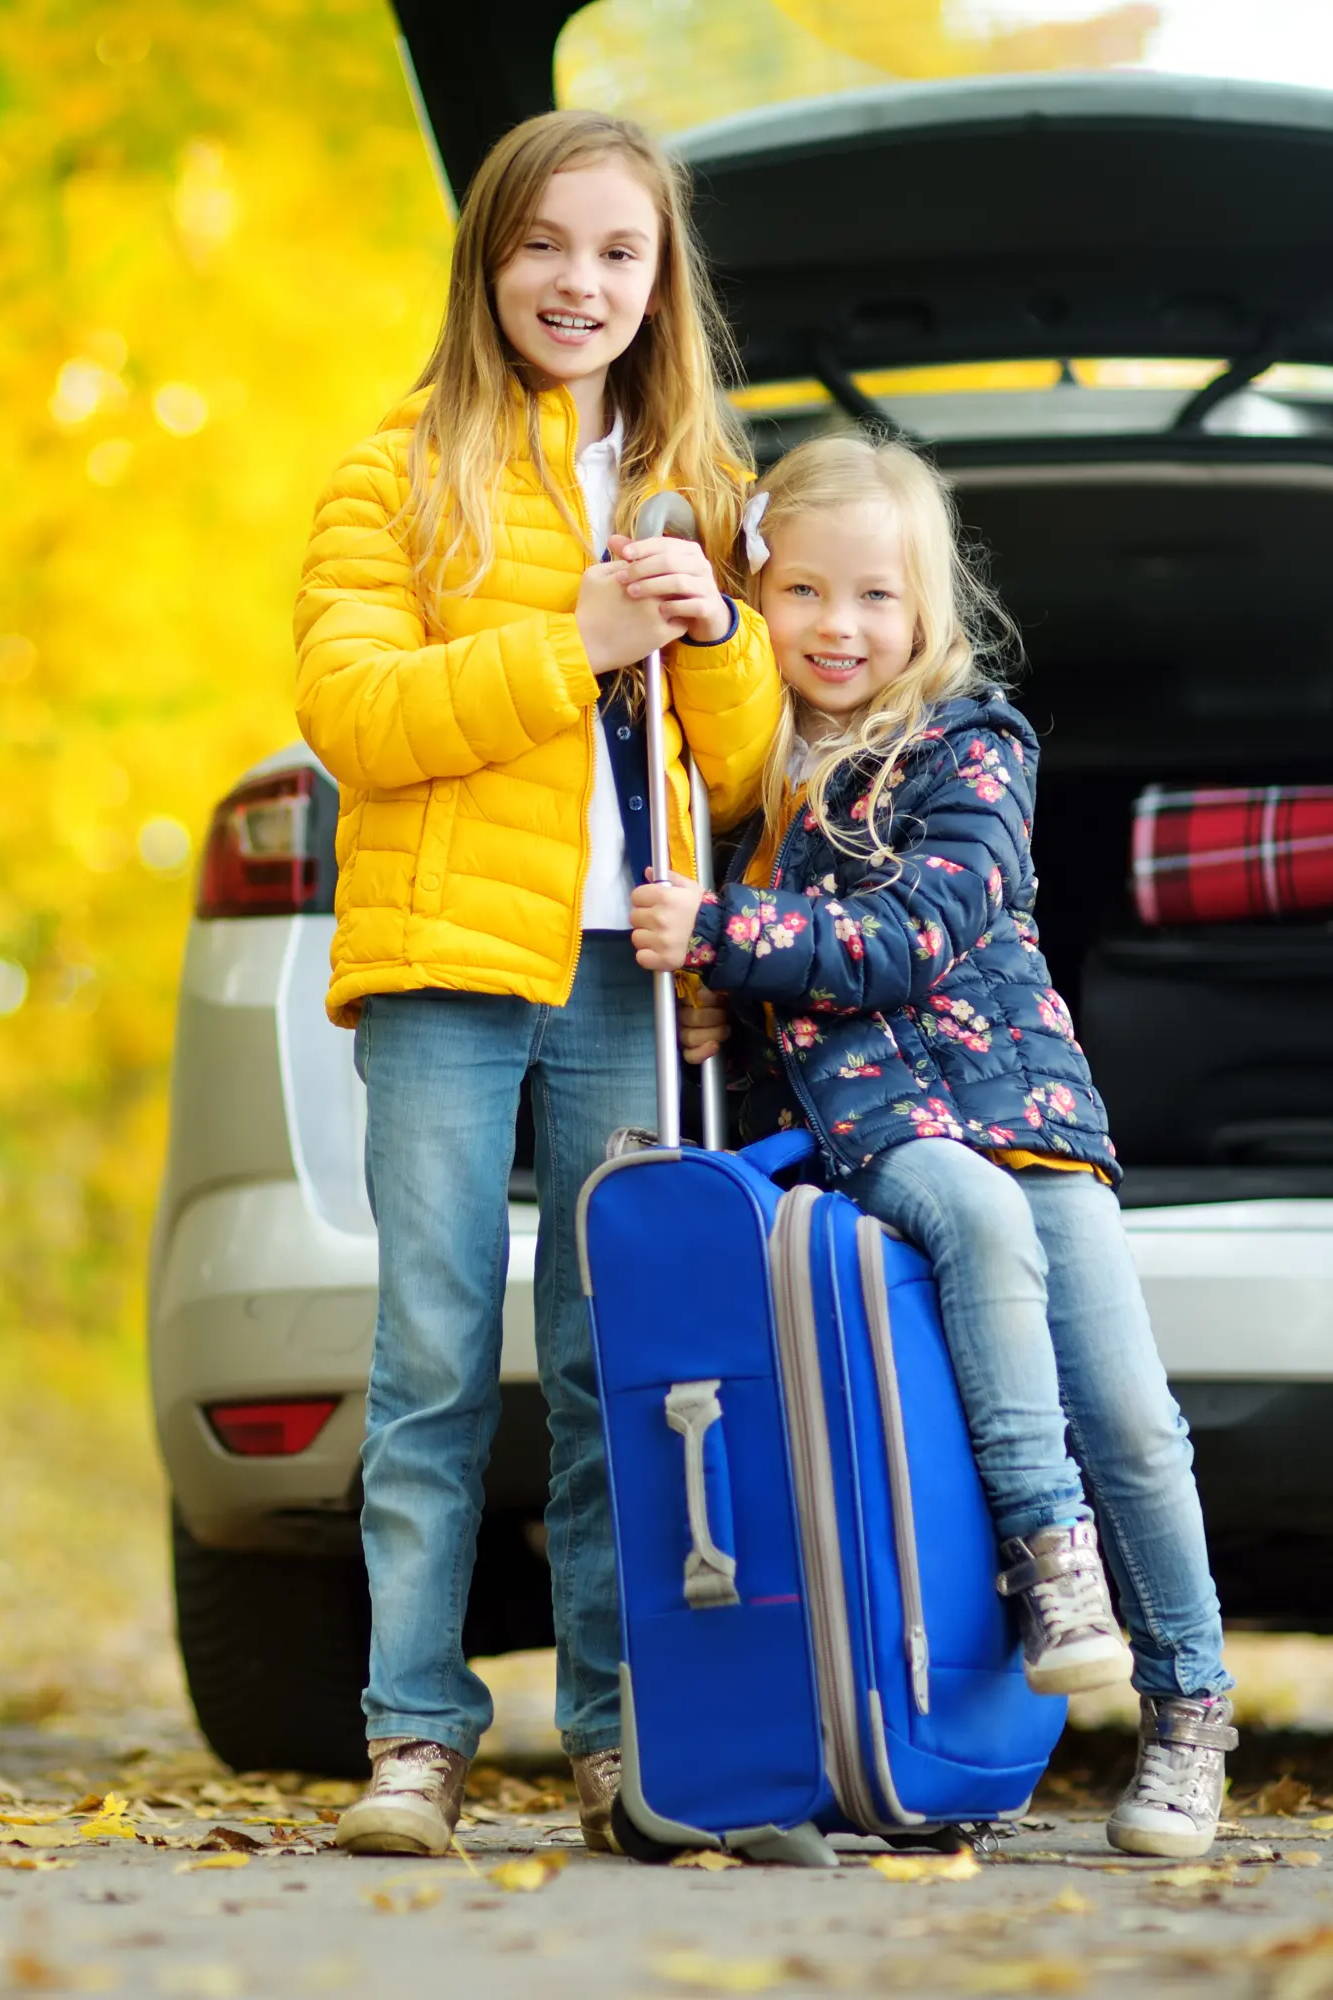 kids holding suitcase outside of car in the fall